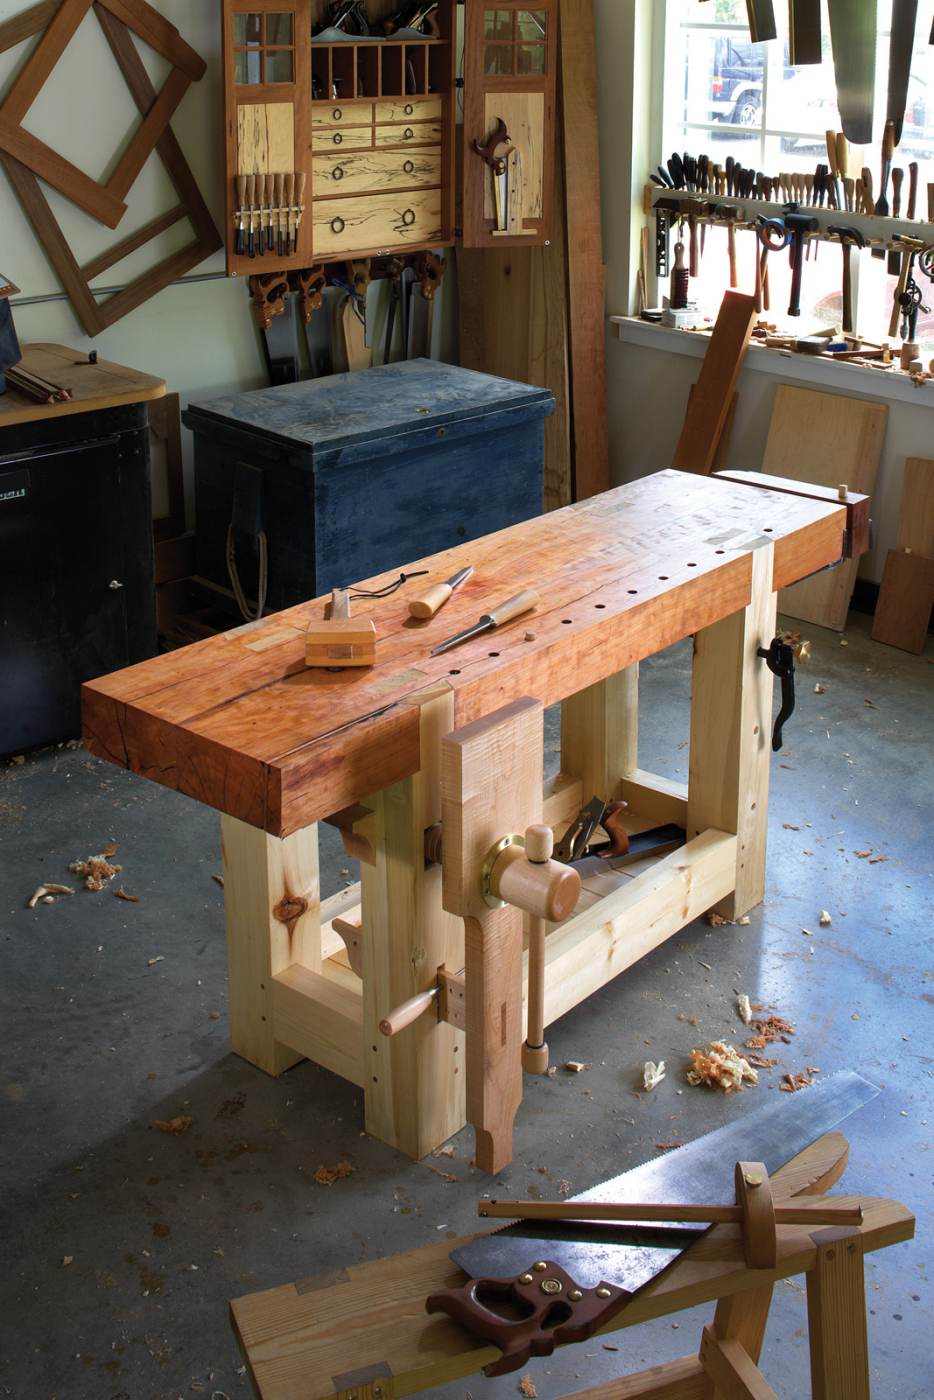 Woodworking. Wood working project on work bench, in a workshop